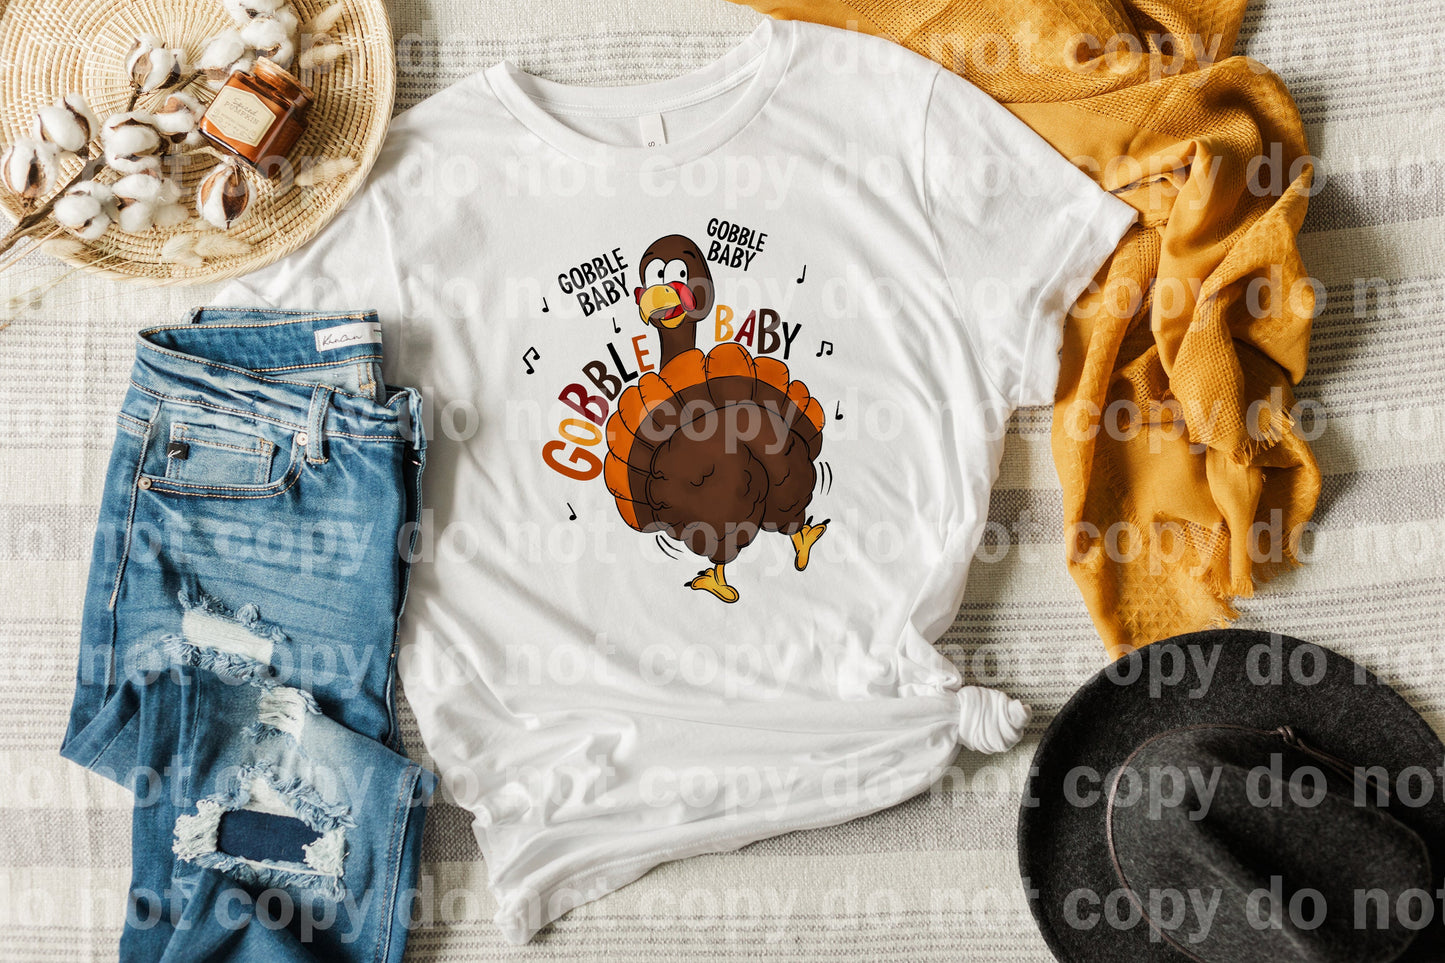 Gobble Baby Dream Print or Sublimation Print